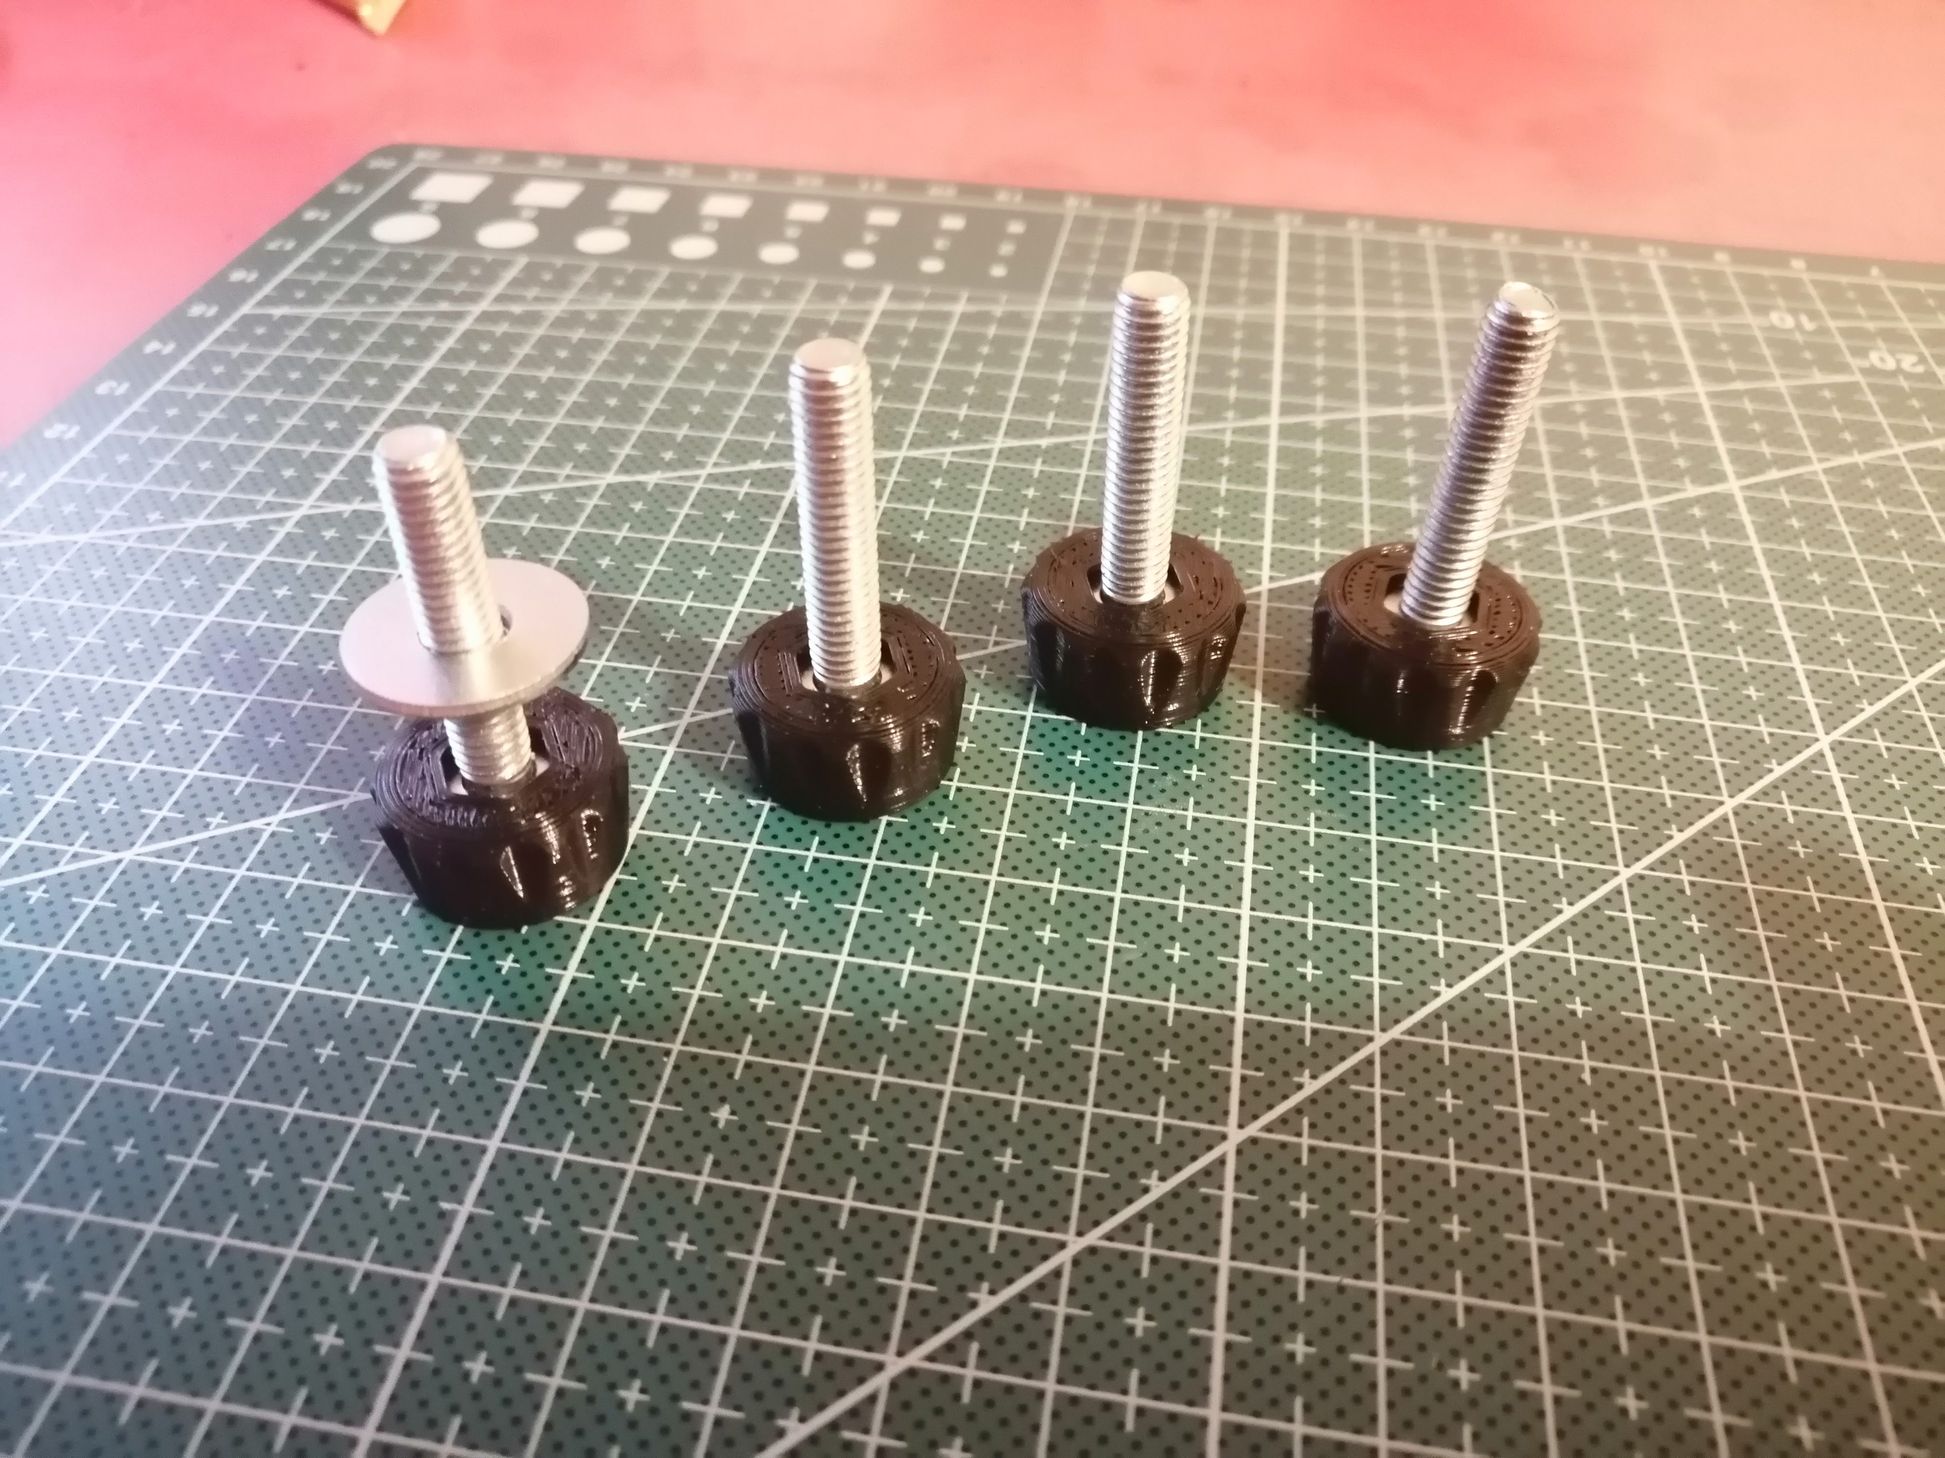 Simple snap-in TPU height adjustable M6 hex bolt feet